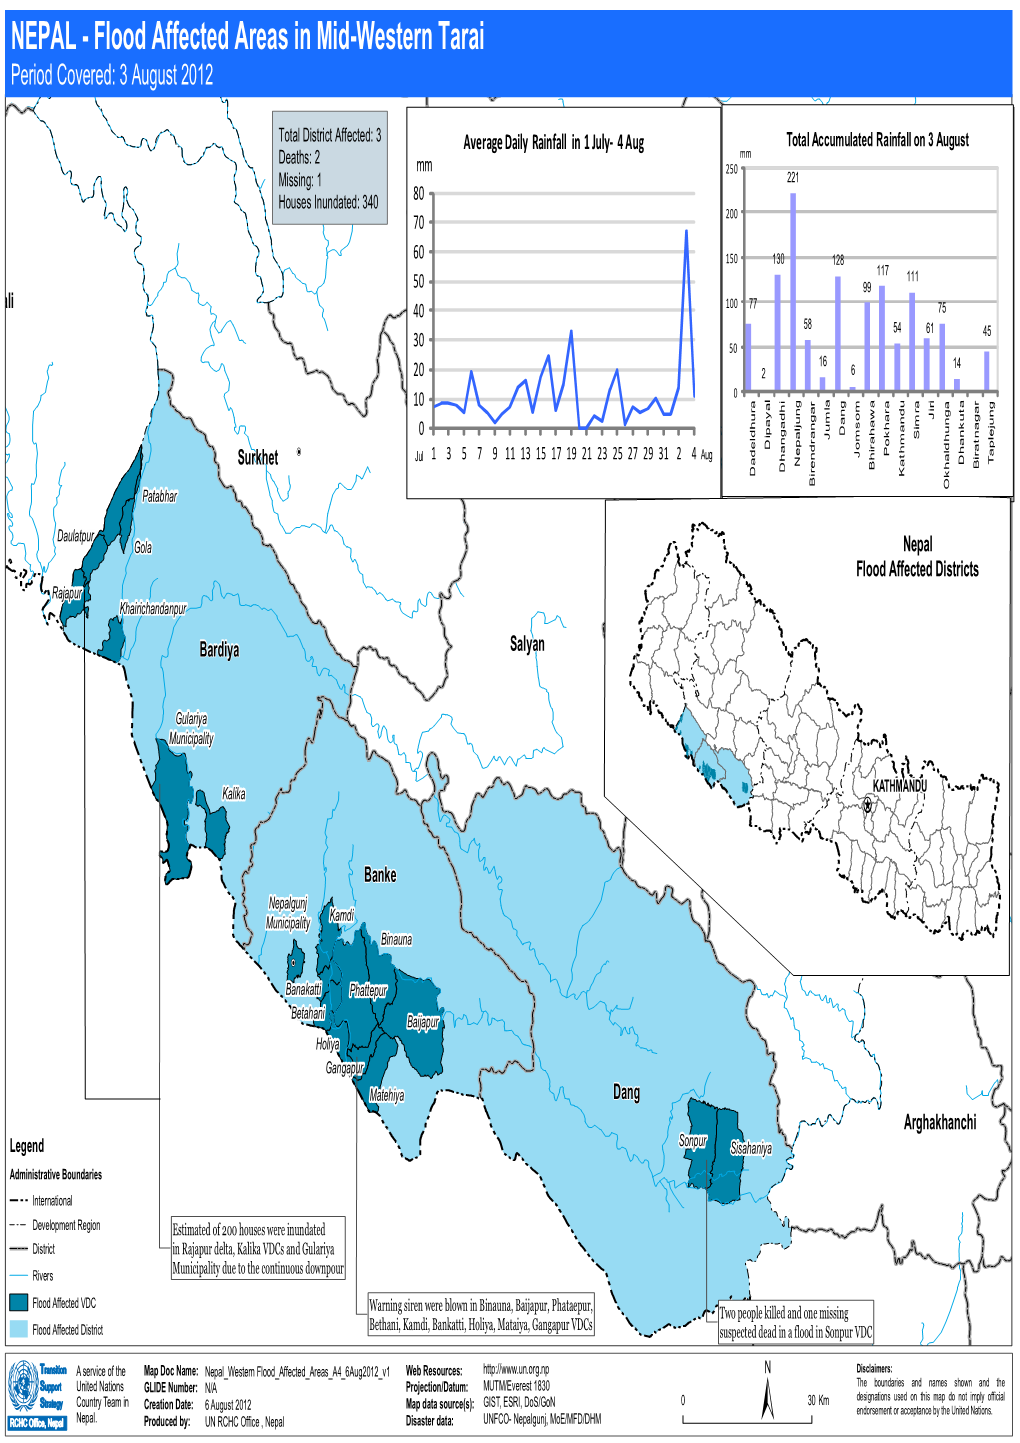 NEPAL - Flood Affected Areas in Mid-Western Tarai Period Covered: 3 August 2012